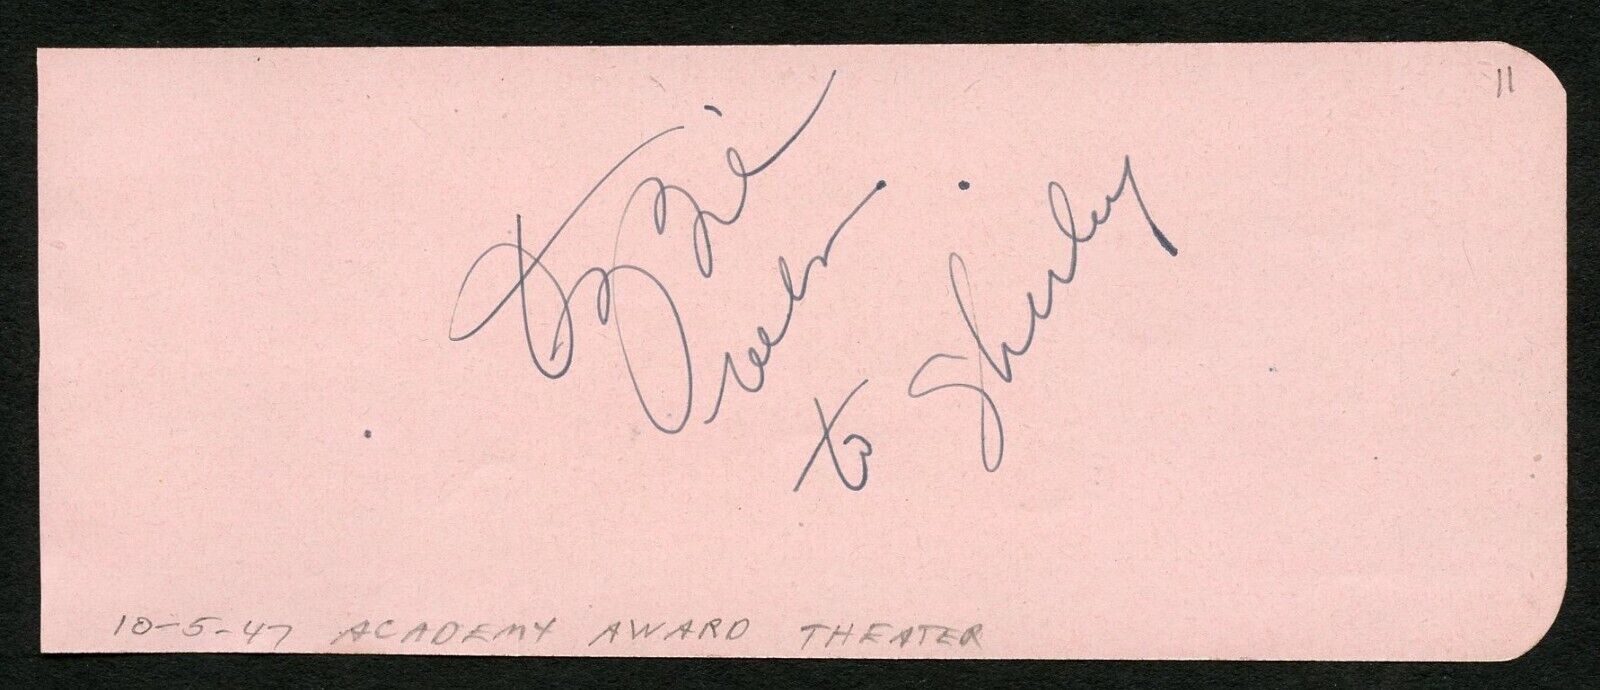 Ozzie Nelson d1975 signed 2x5 cut autograph on 10-5-47 at Academy Award Theater